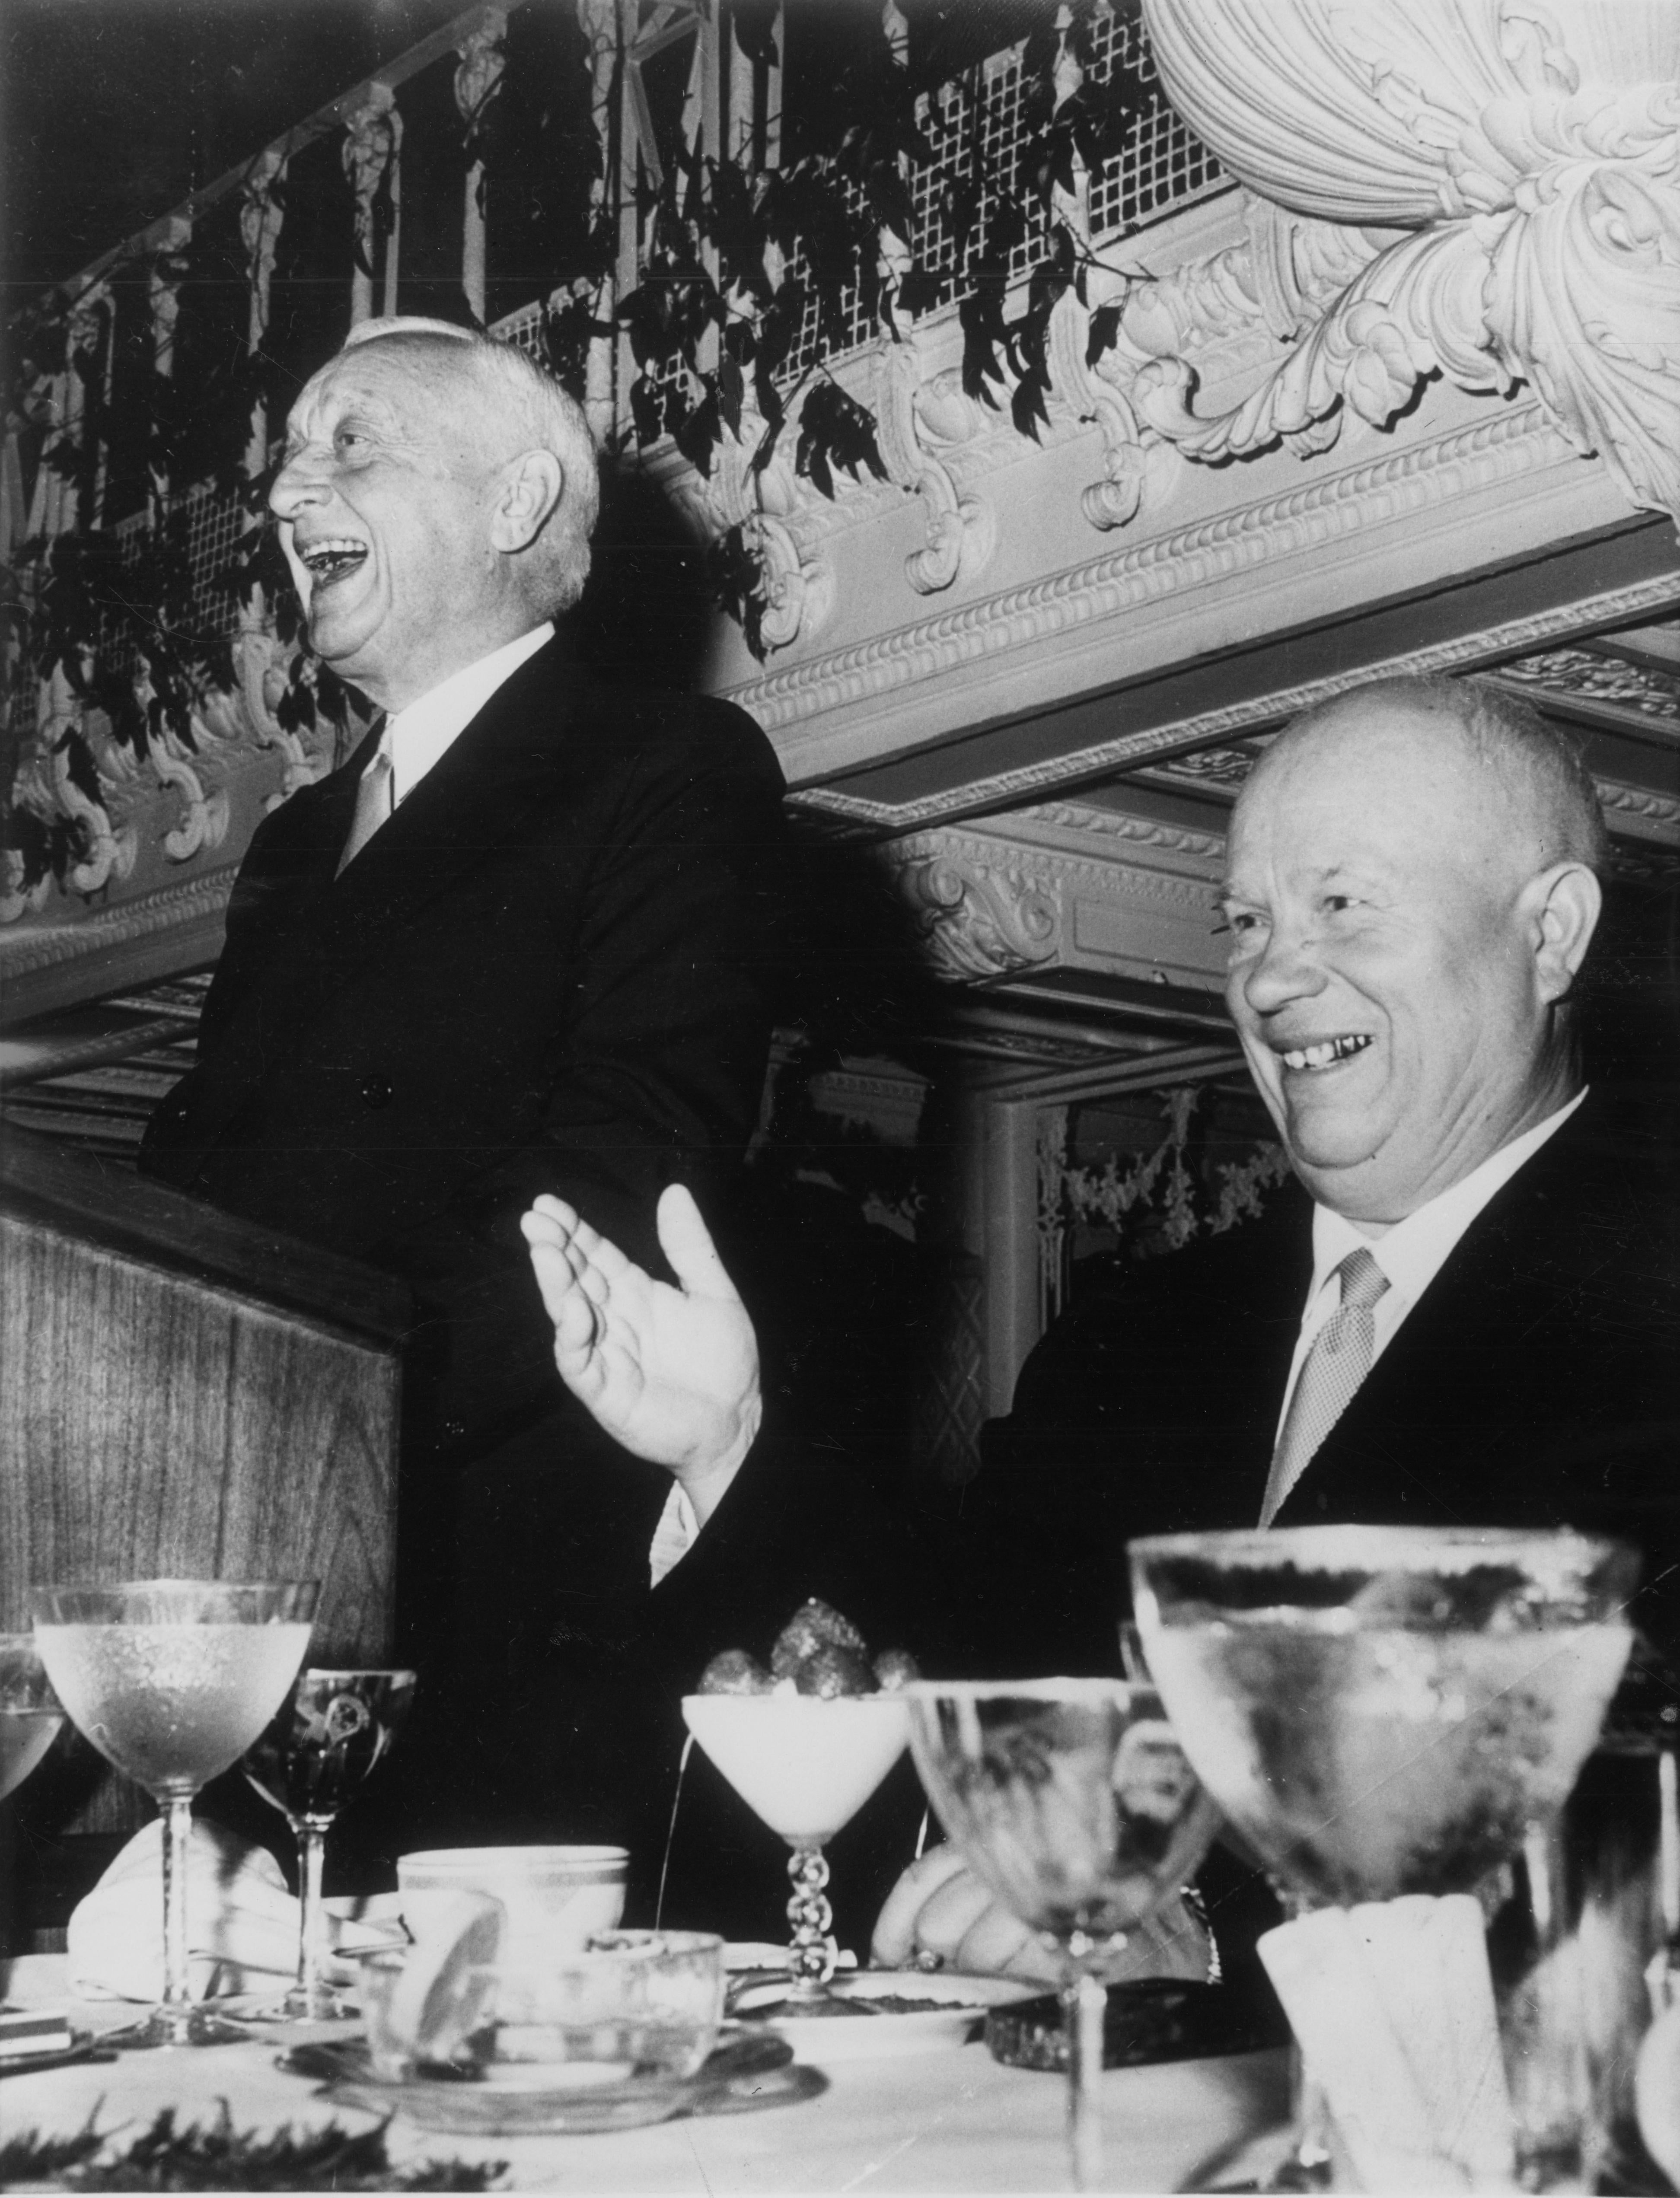 Cyris Eaton (standing) and Nikita Khrushchev (sitting) at the Biltmore Hotel lunch reception, September 30, 1960.